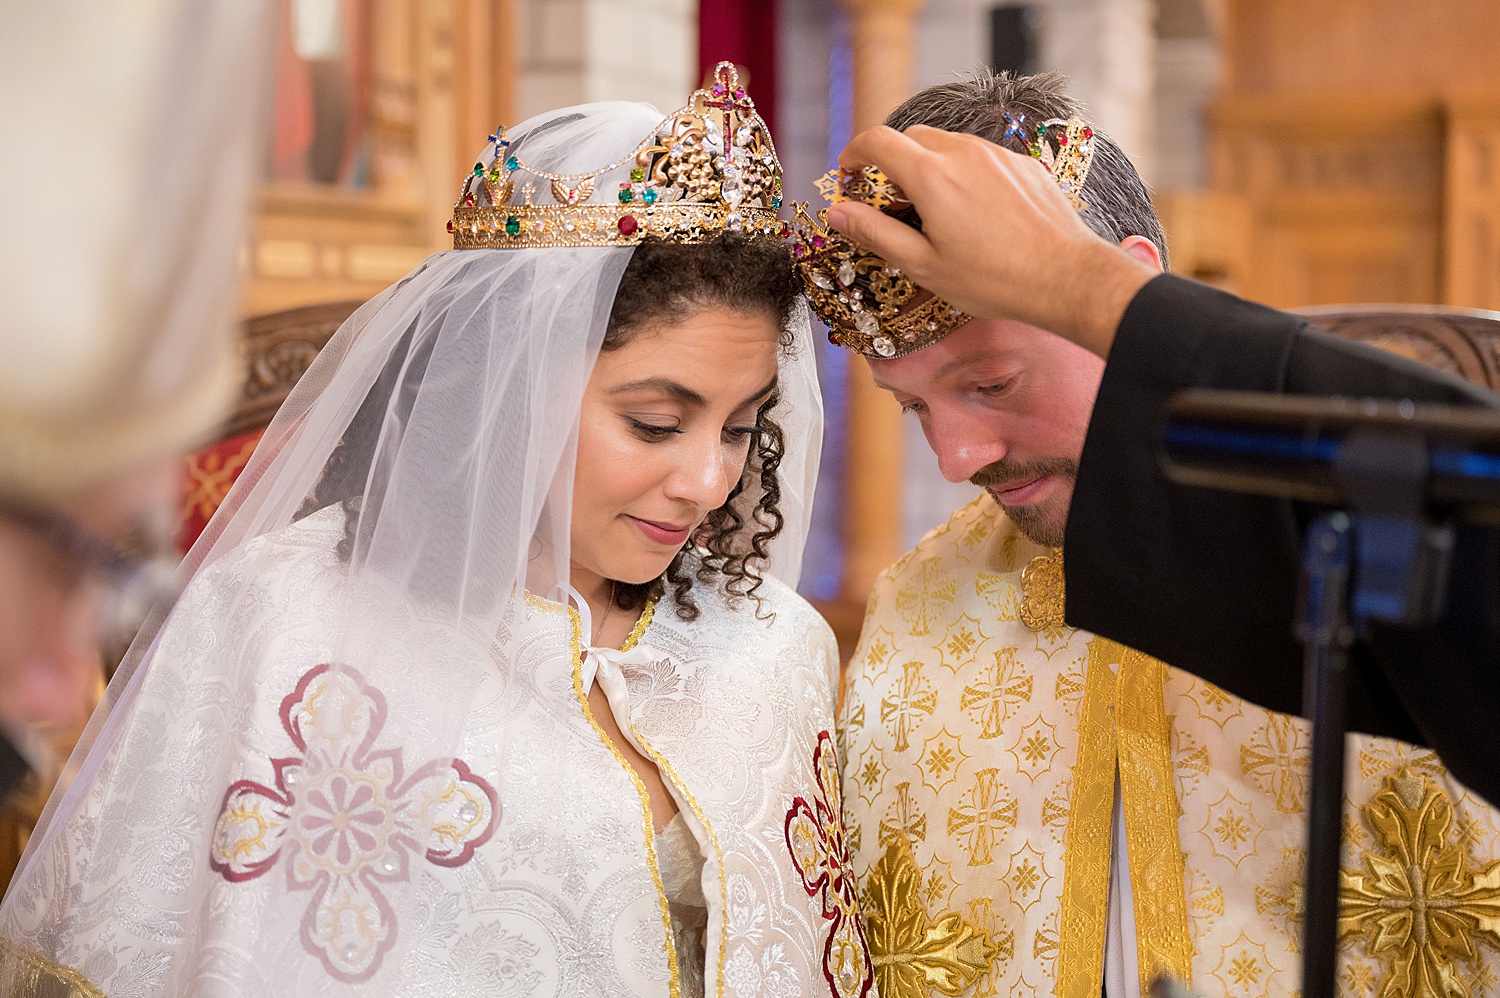 Crowning ceremony in a Coptic Orthodox Wedding in Pittsburgh • Coptic Orthodox Ceremony: How to Photograph a Wedding at St Mary's Church in Ambridge Pittsburgh